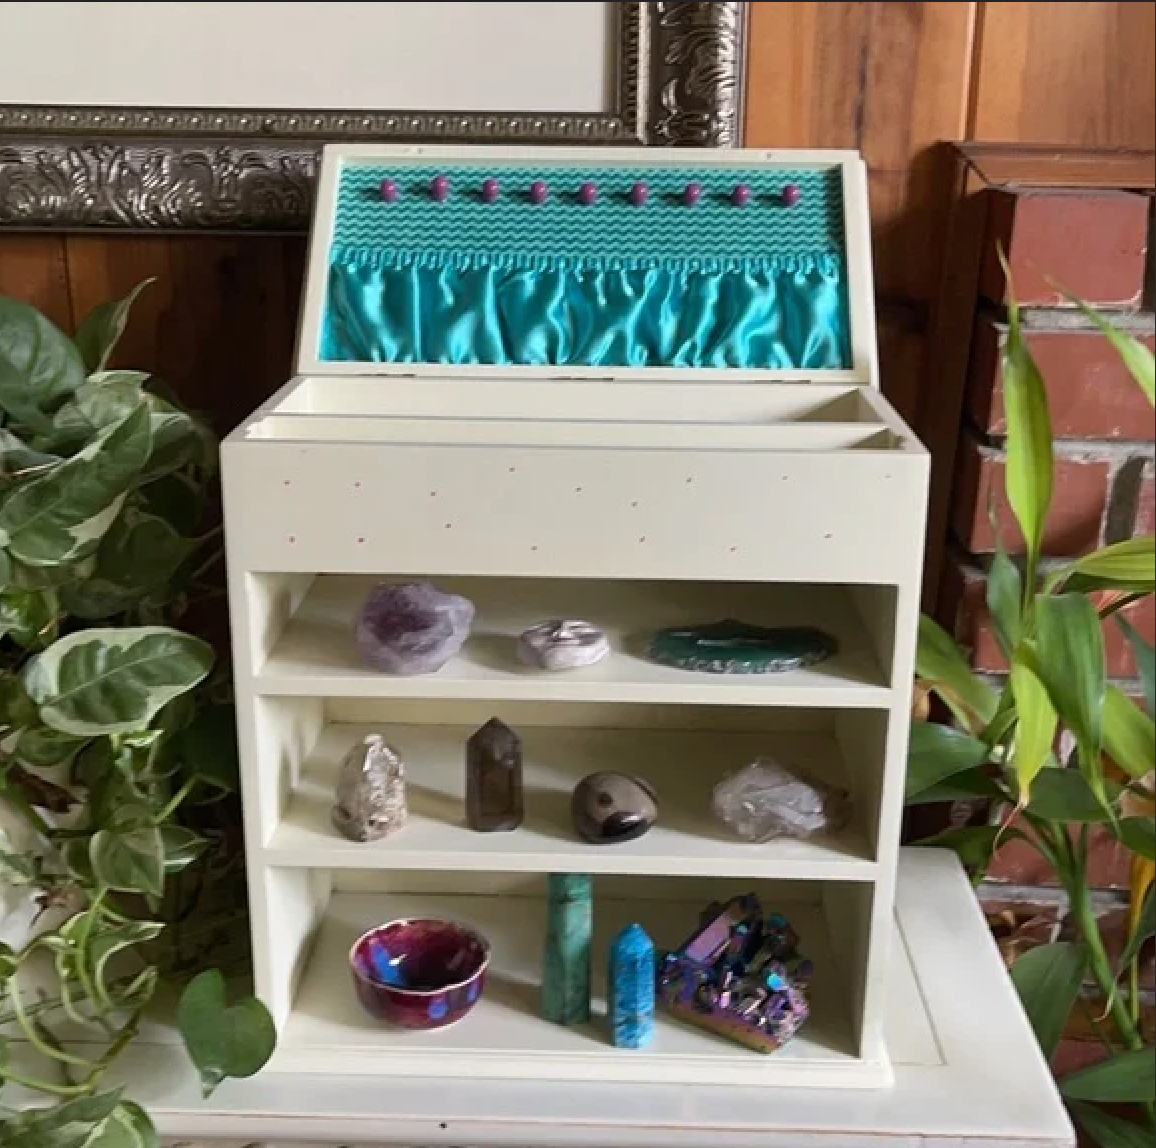 Lovecycled Vintage Goddess Crystal Display Cabinet, Bodhi Lovecycled